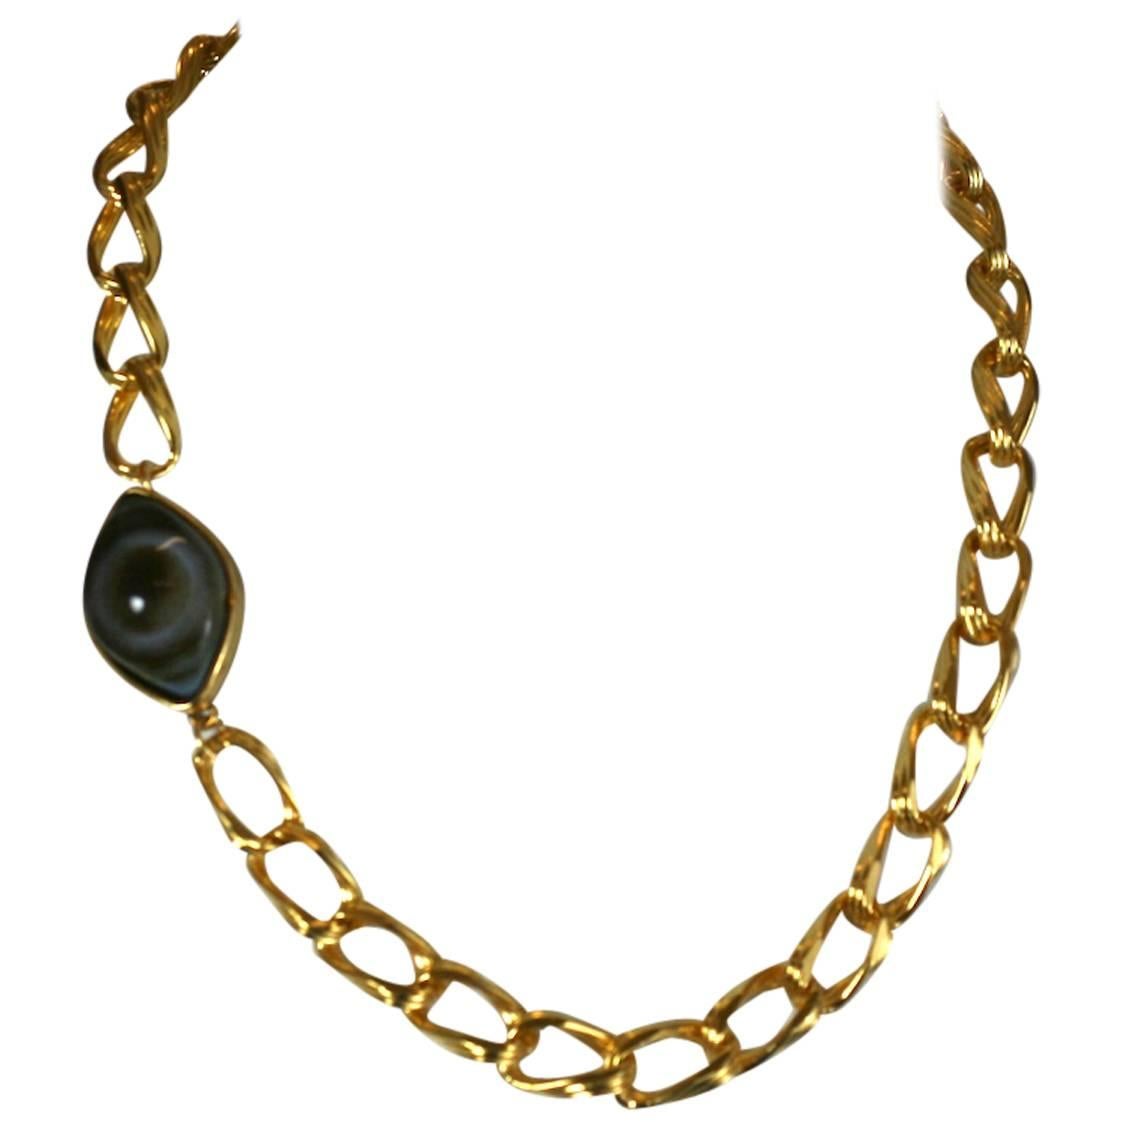 Surreal "Eye" Chain Necklace, MWLC